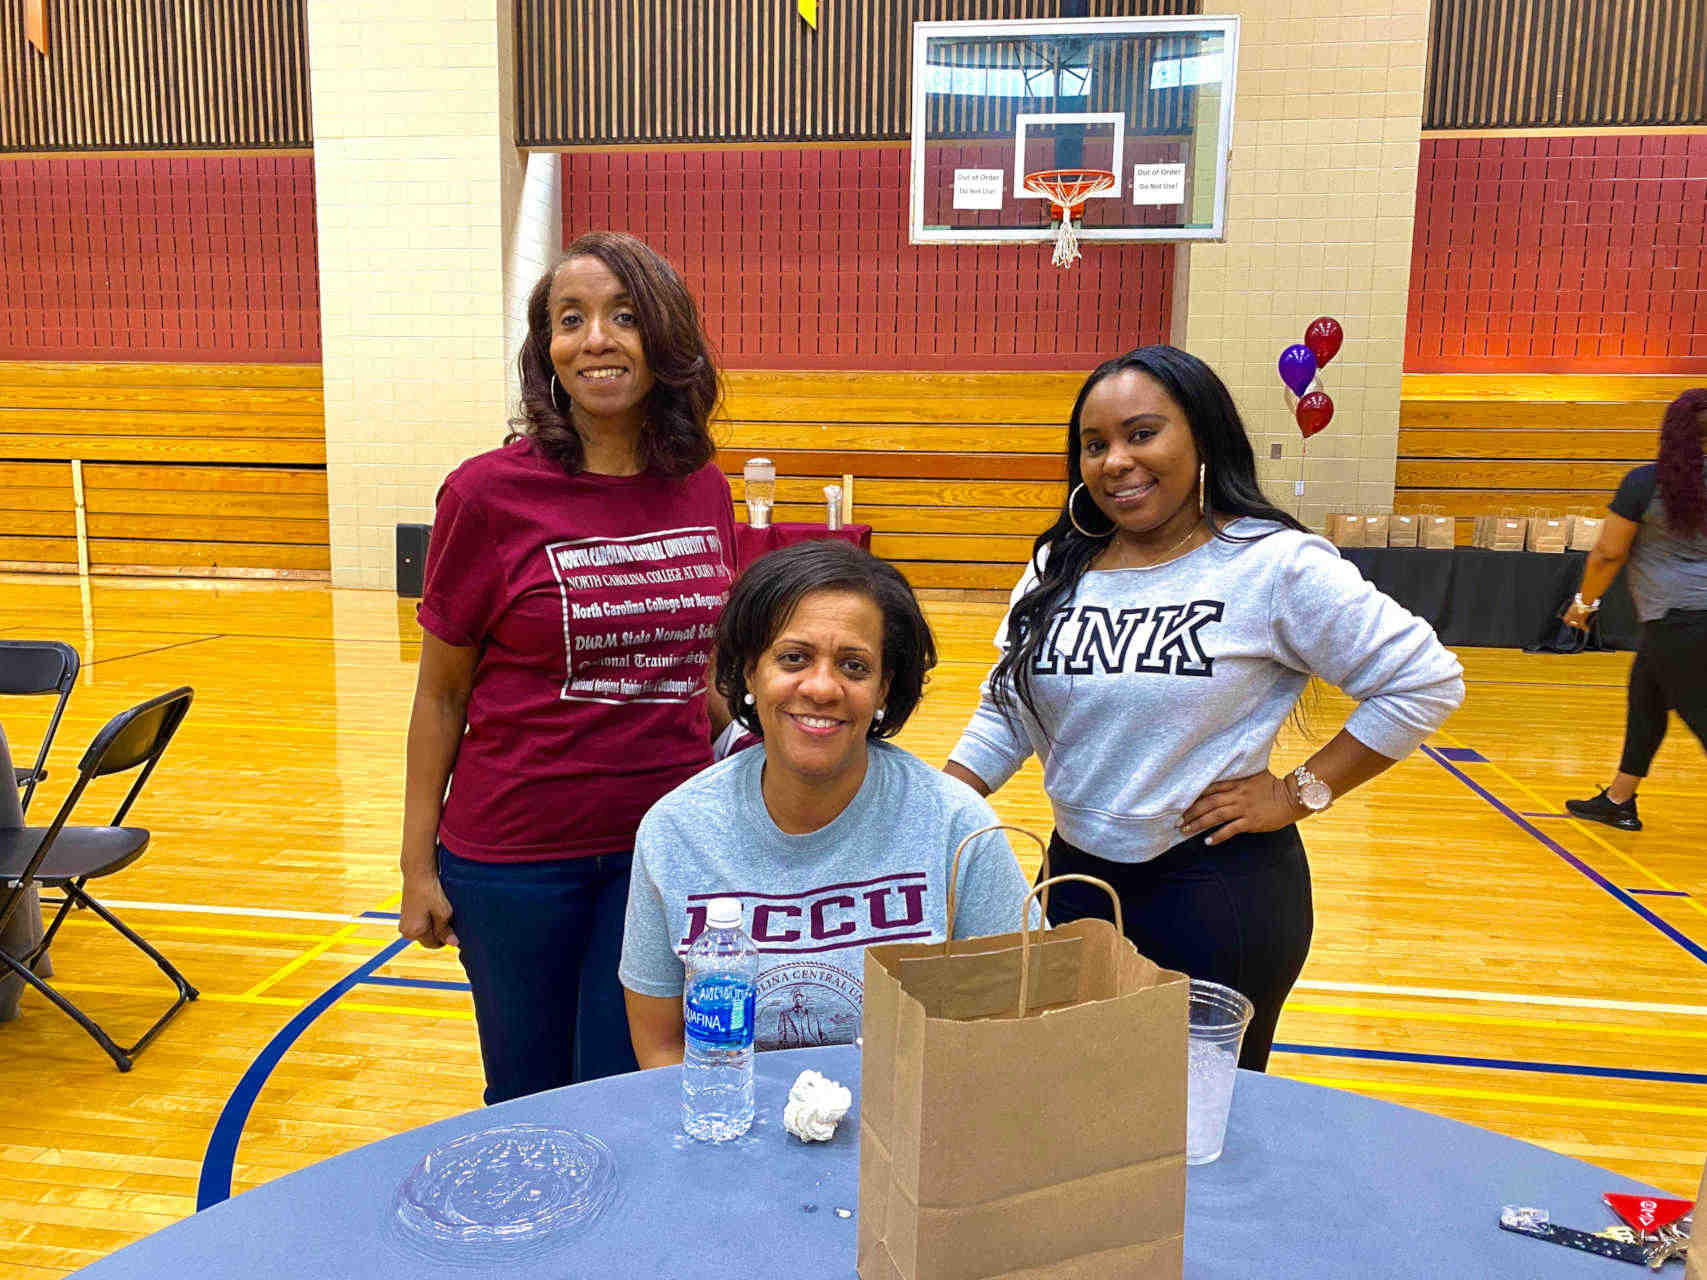 Three women smiling for the camera in the NCCU gymnasium